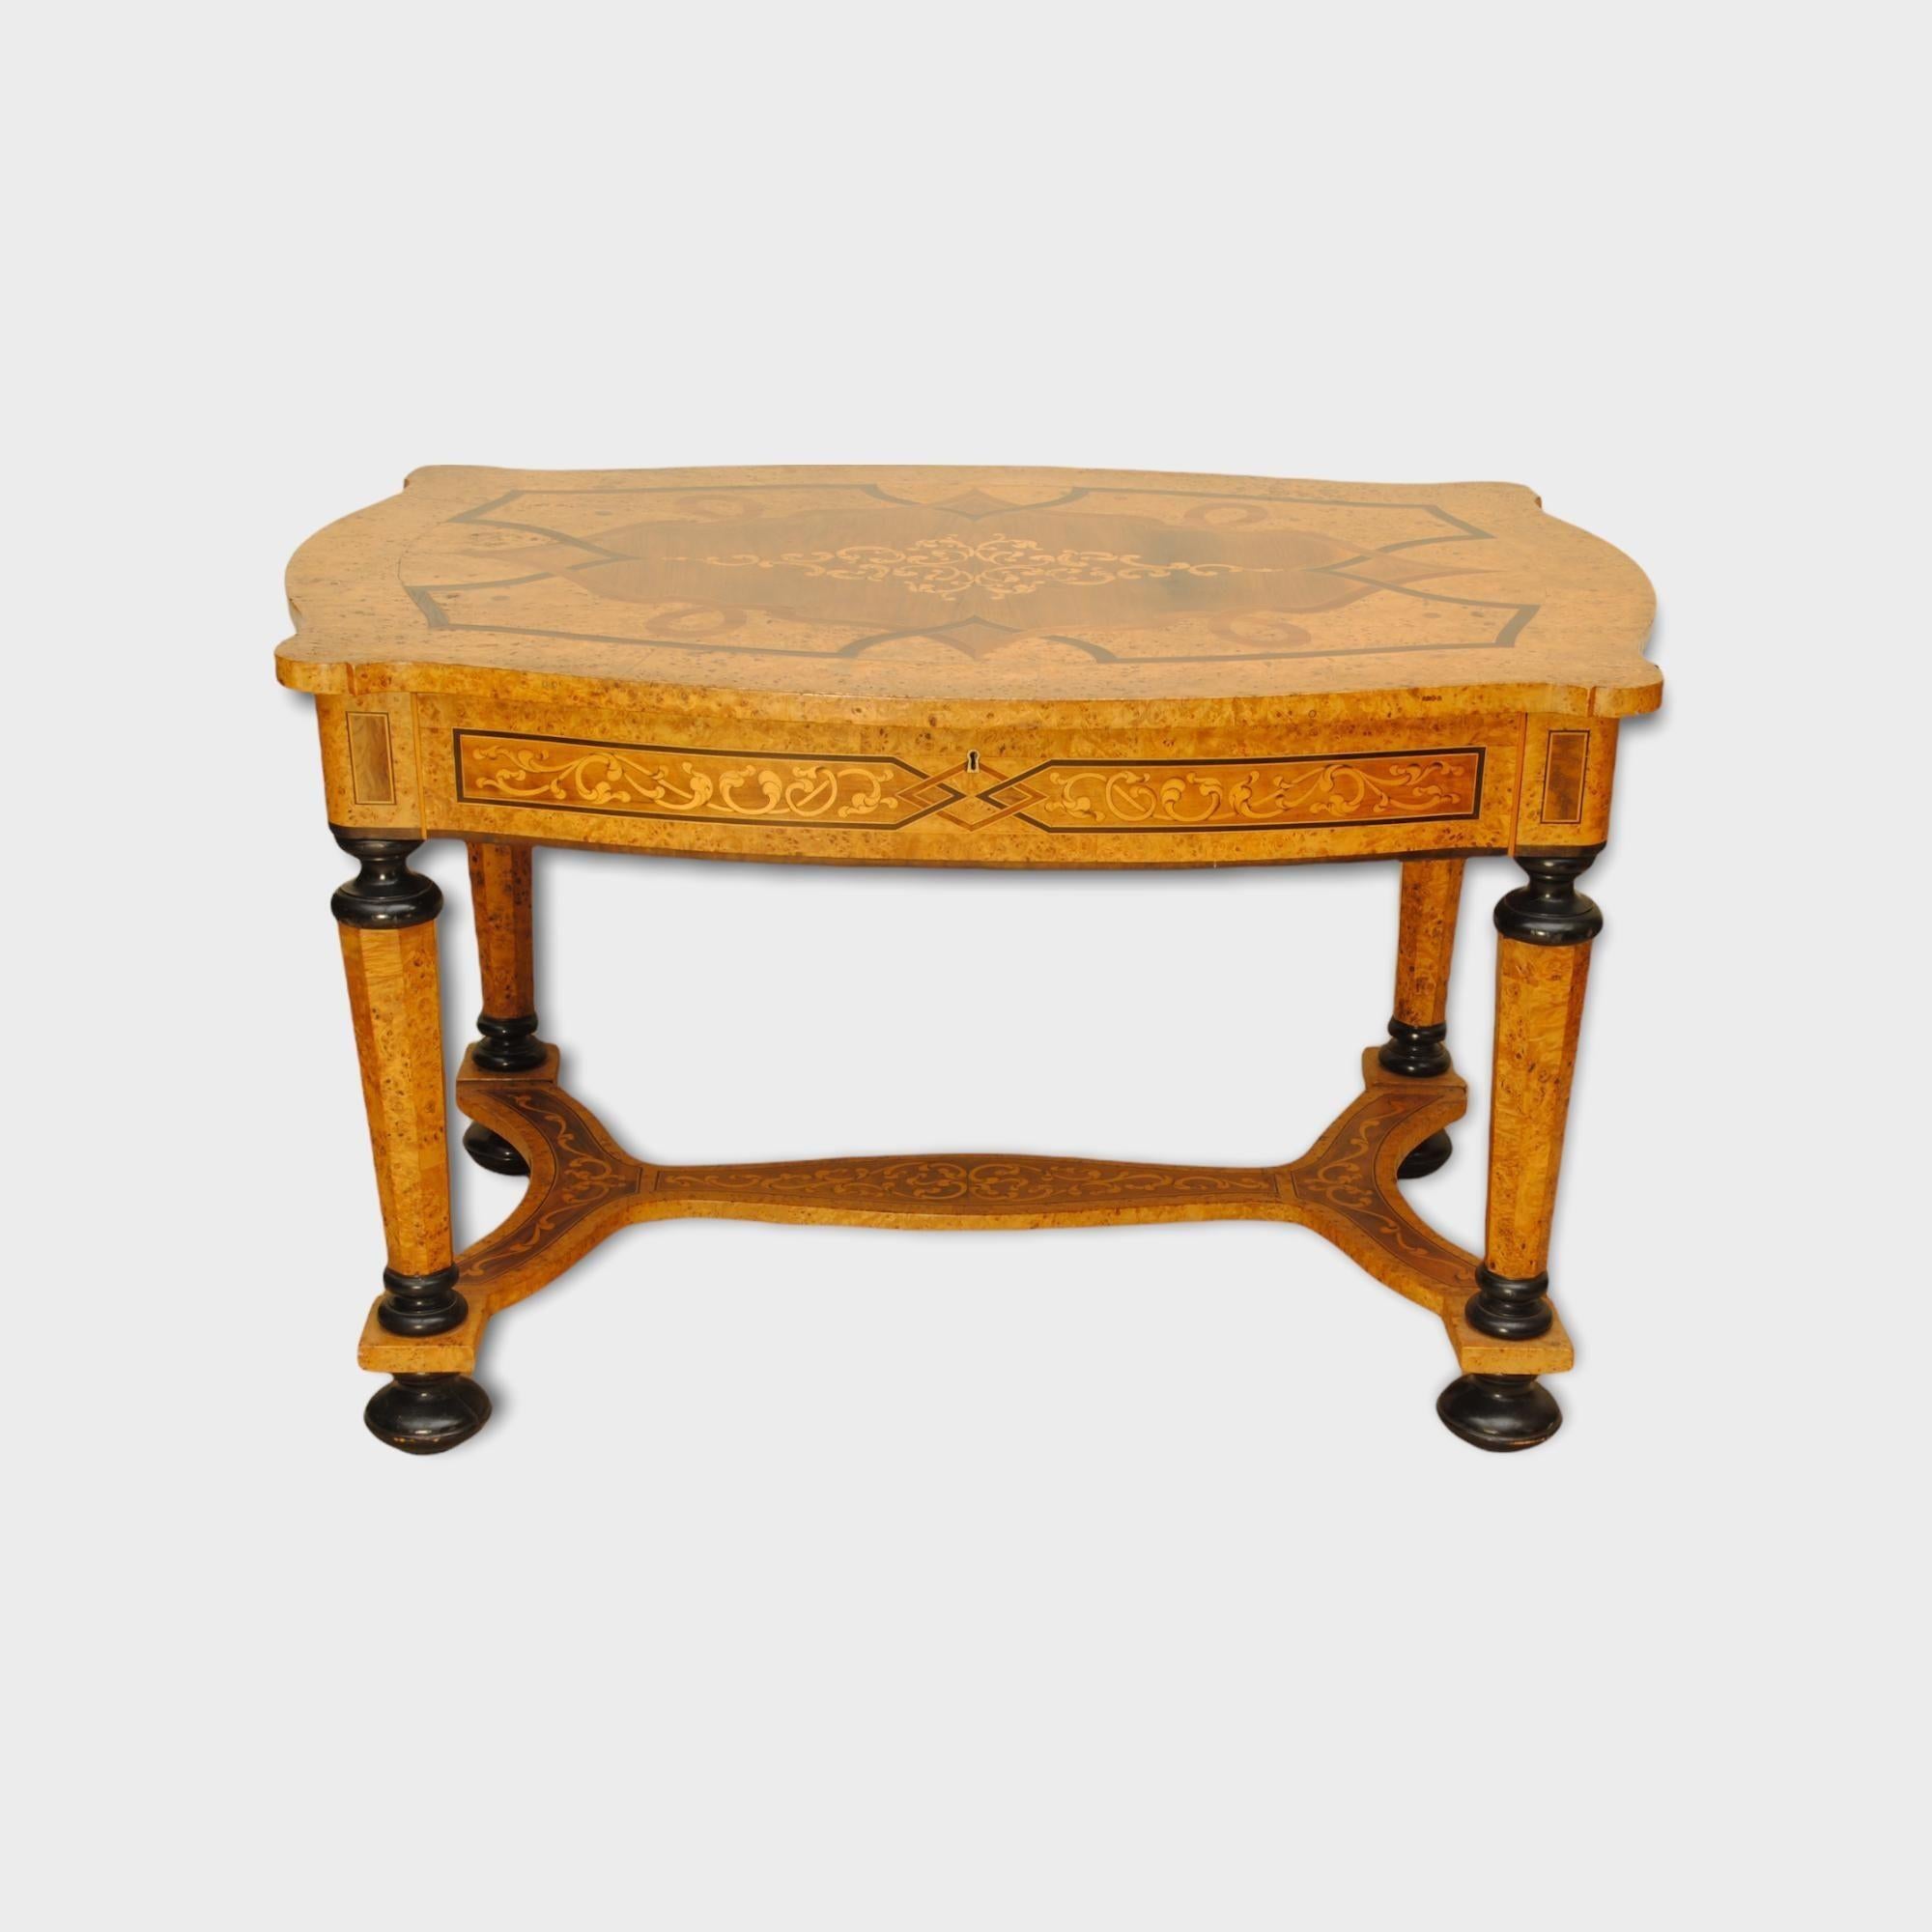 A 19th century German burr field maple marquetry inlaid table of lovely colour and decoration, with a drawer to the front frieze. The whole inlaid with flowing floral design and the top with geometric inlays.